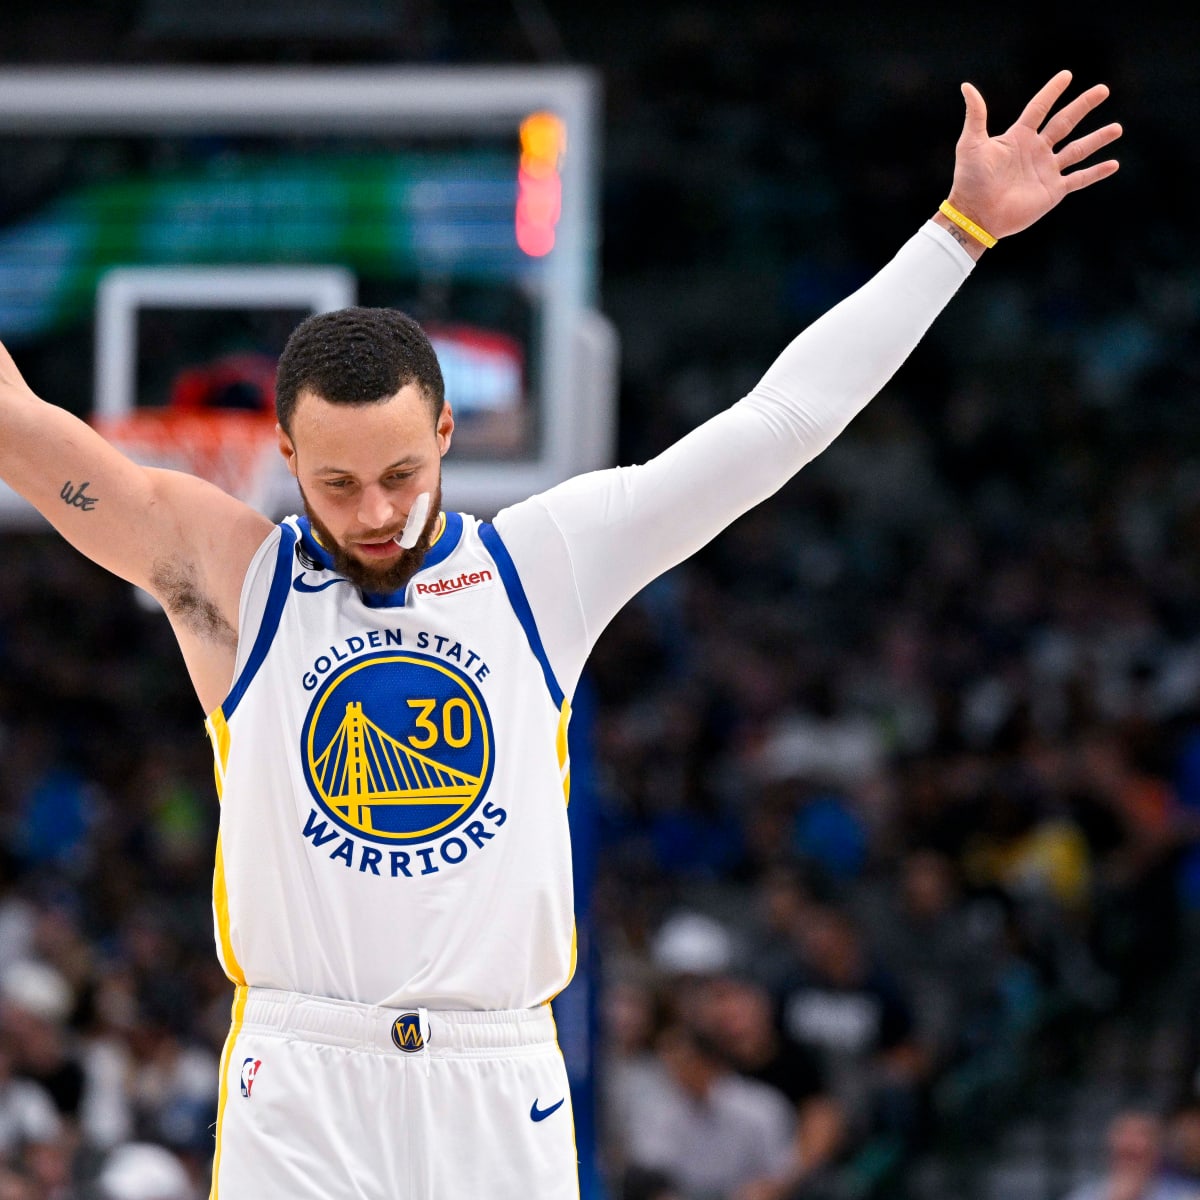 Warriors projected lineup and rotations heading into 2023-24 season